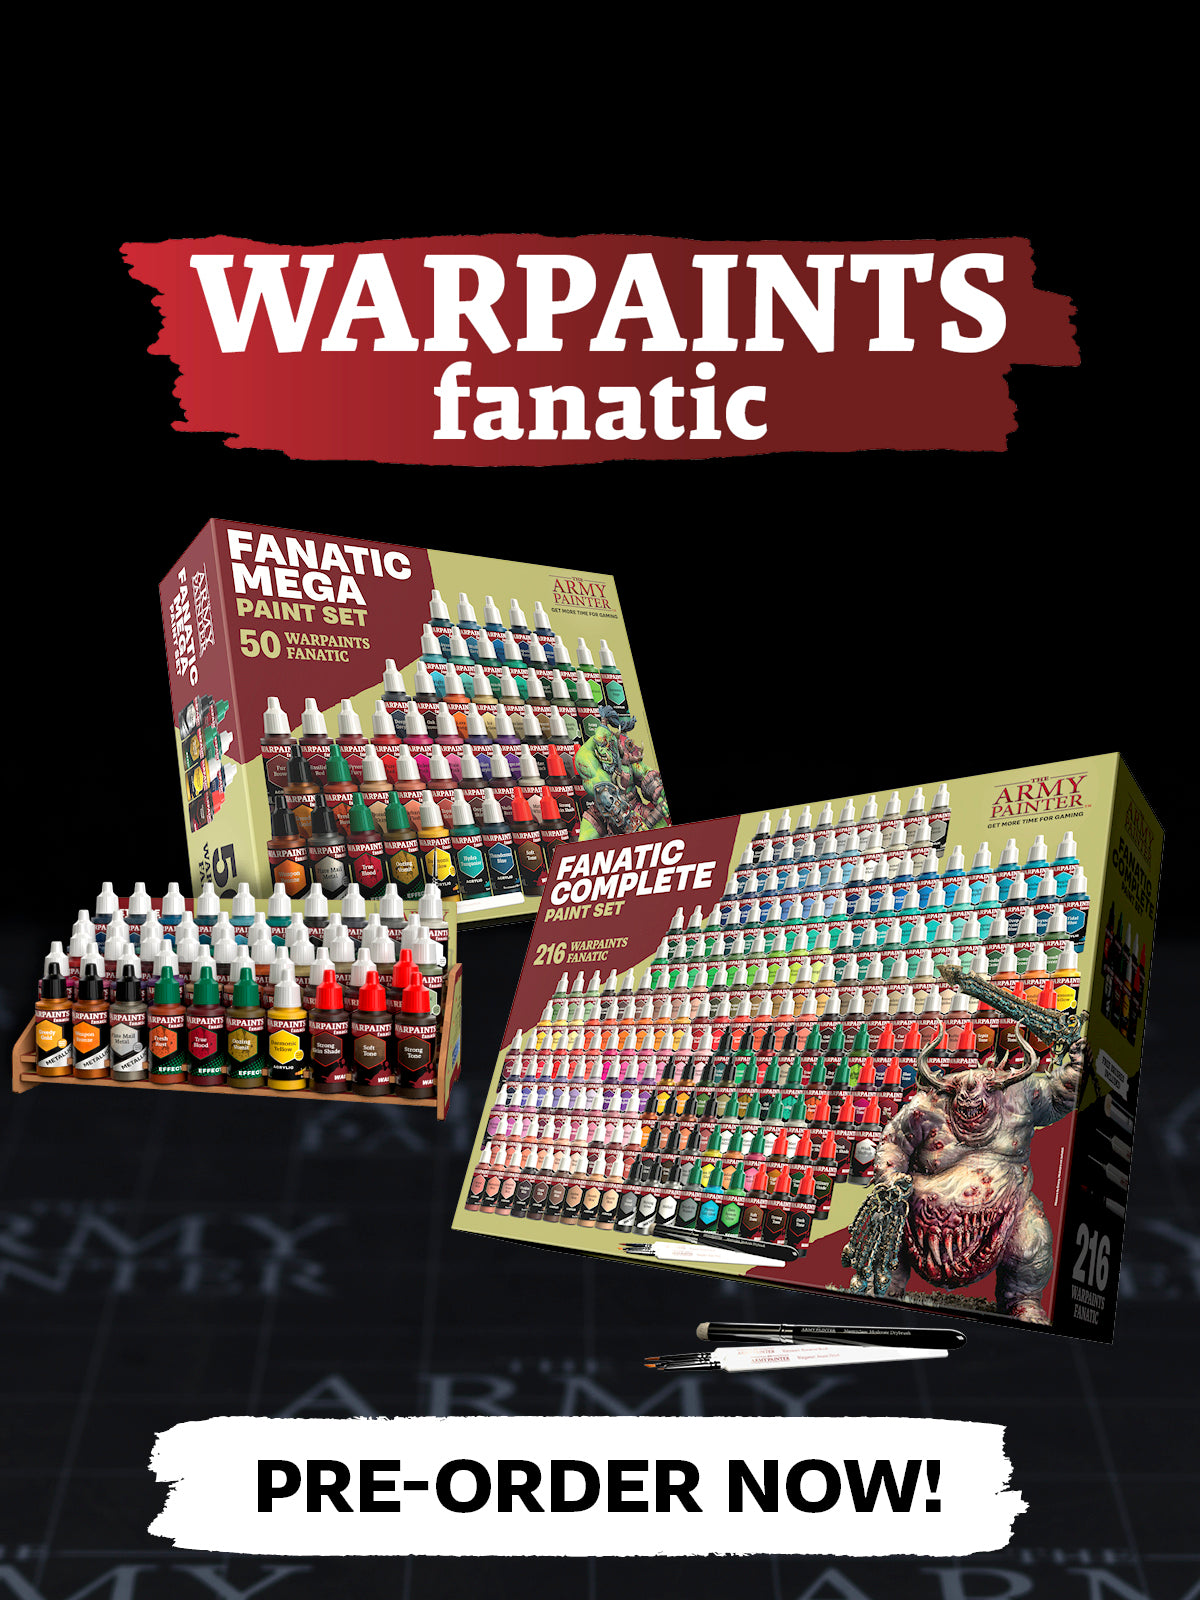 The Army Painter Hobby Kit Tools & Model Paint Set for Miniature Painting